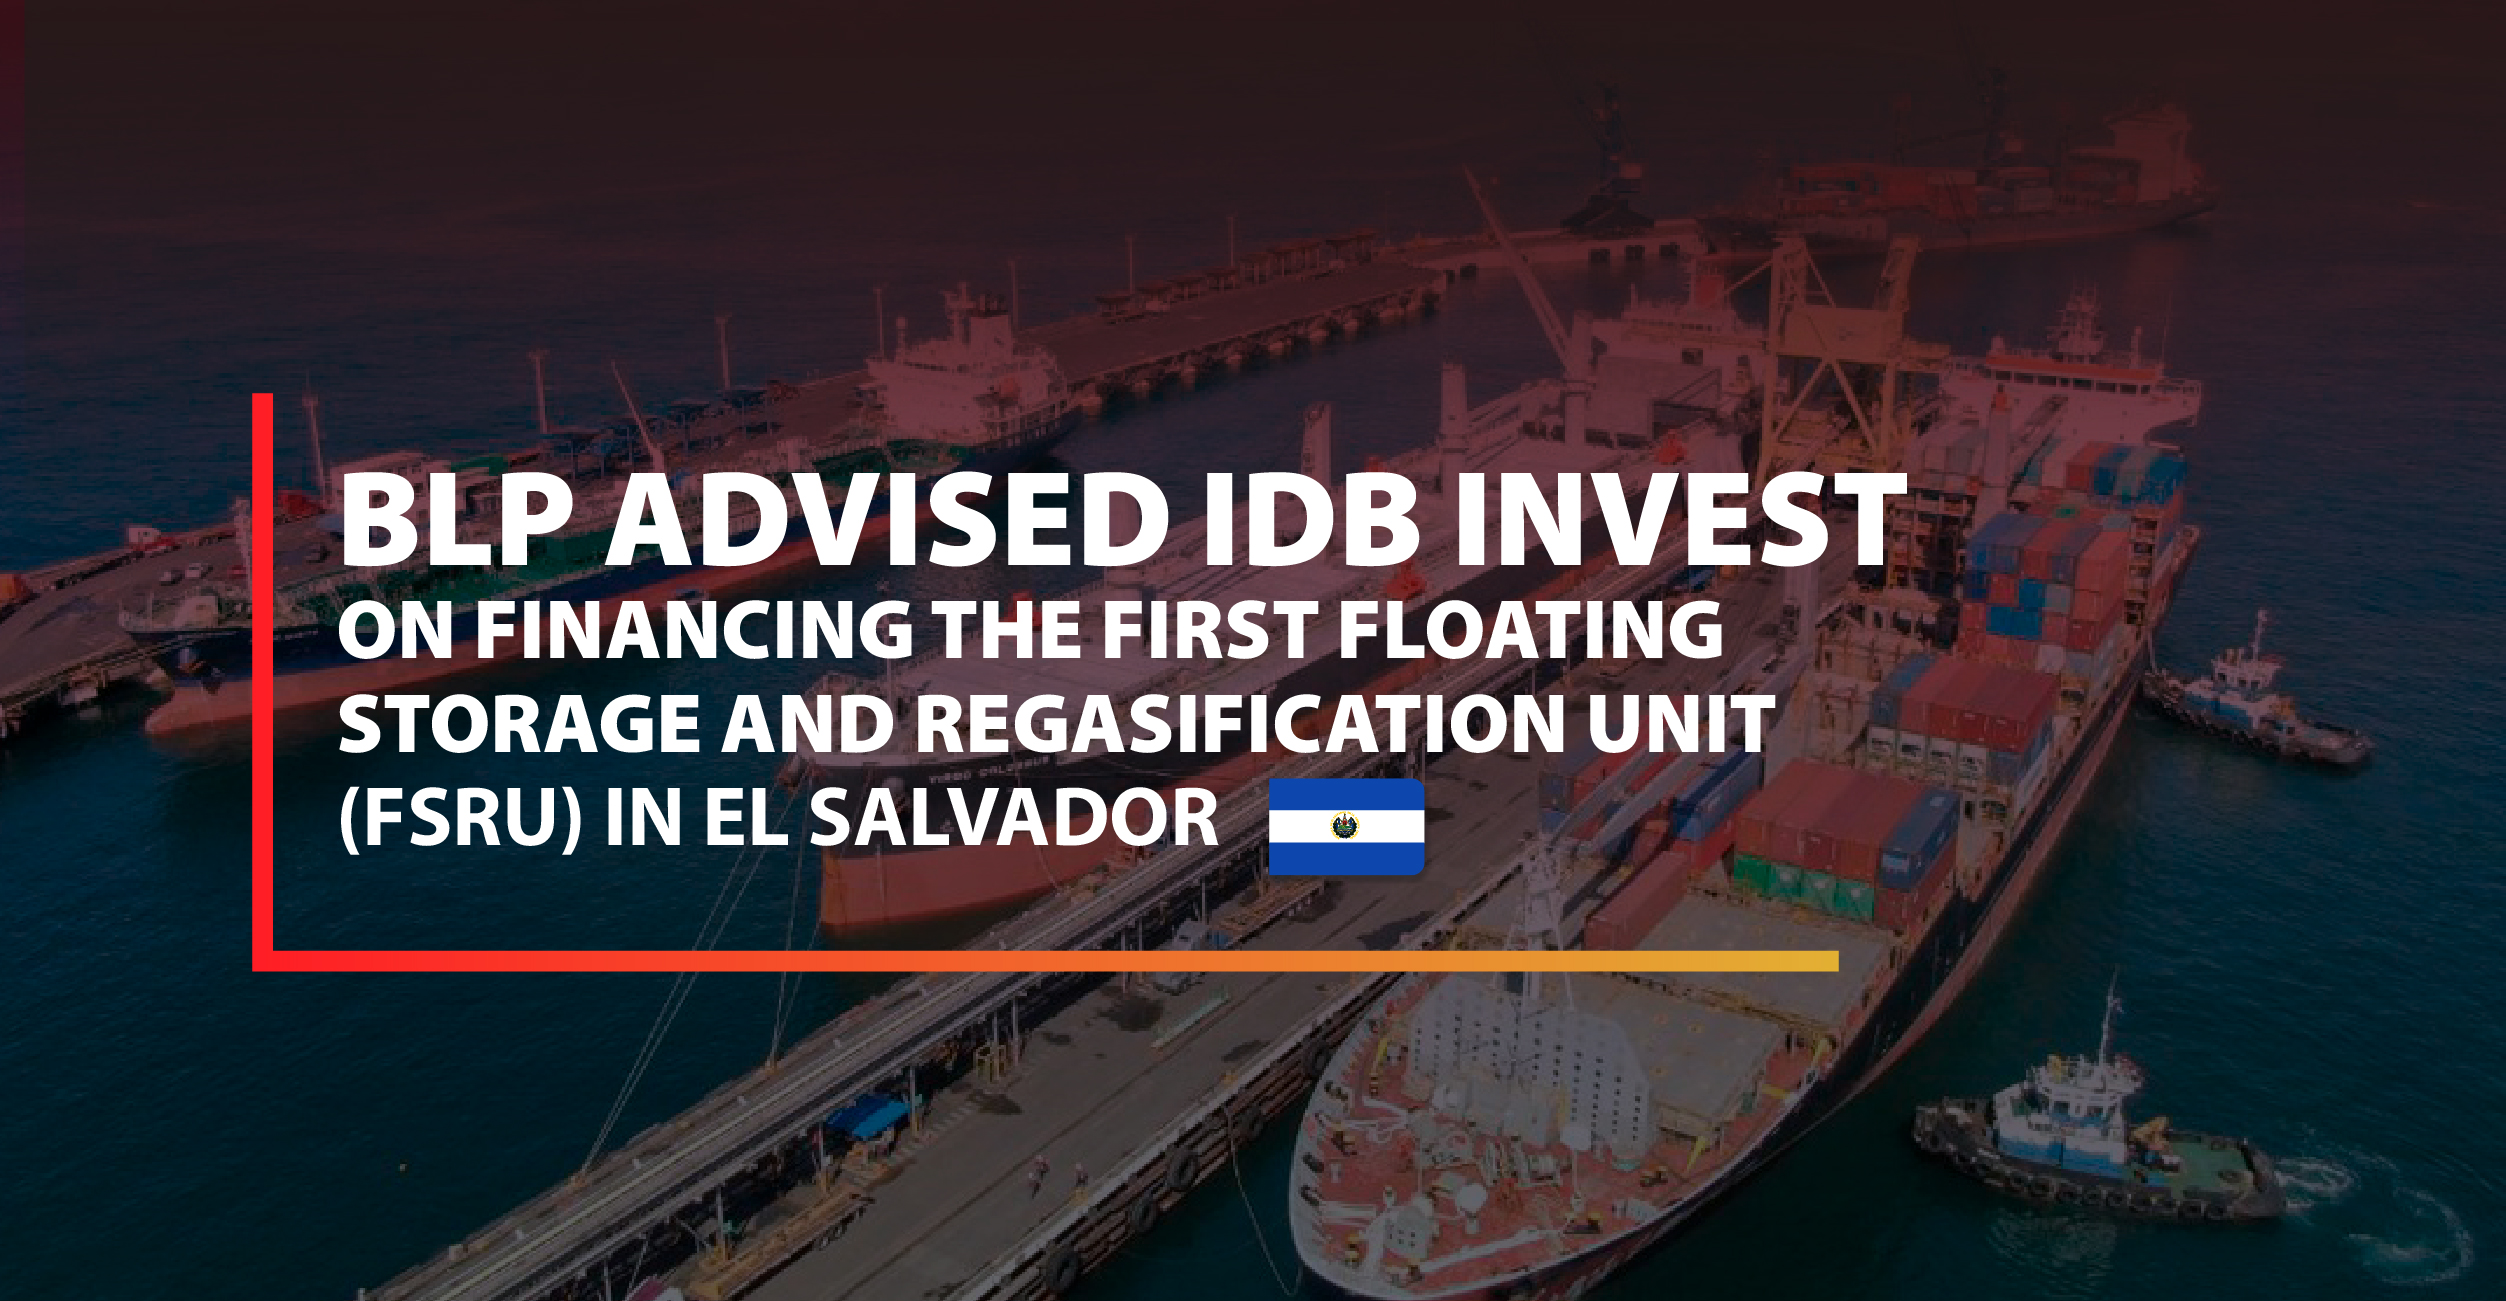 BLP advised IDB Invest in the financing of the first Floating Storage and Regasification Unit (FSRU) in El Salvador.